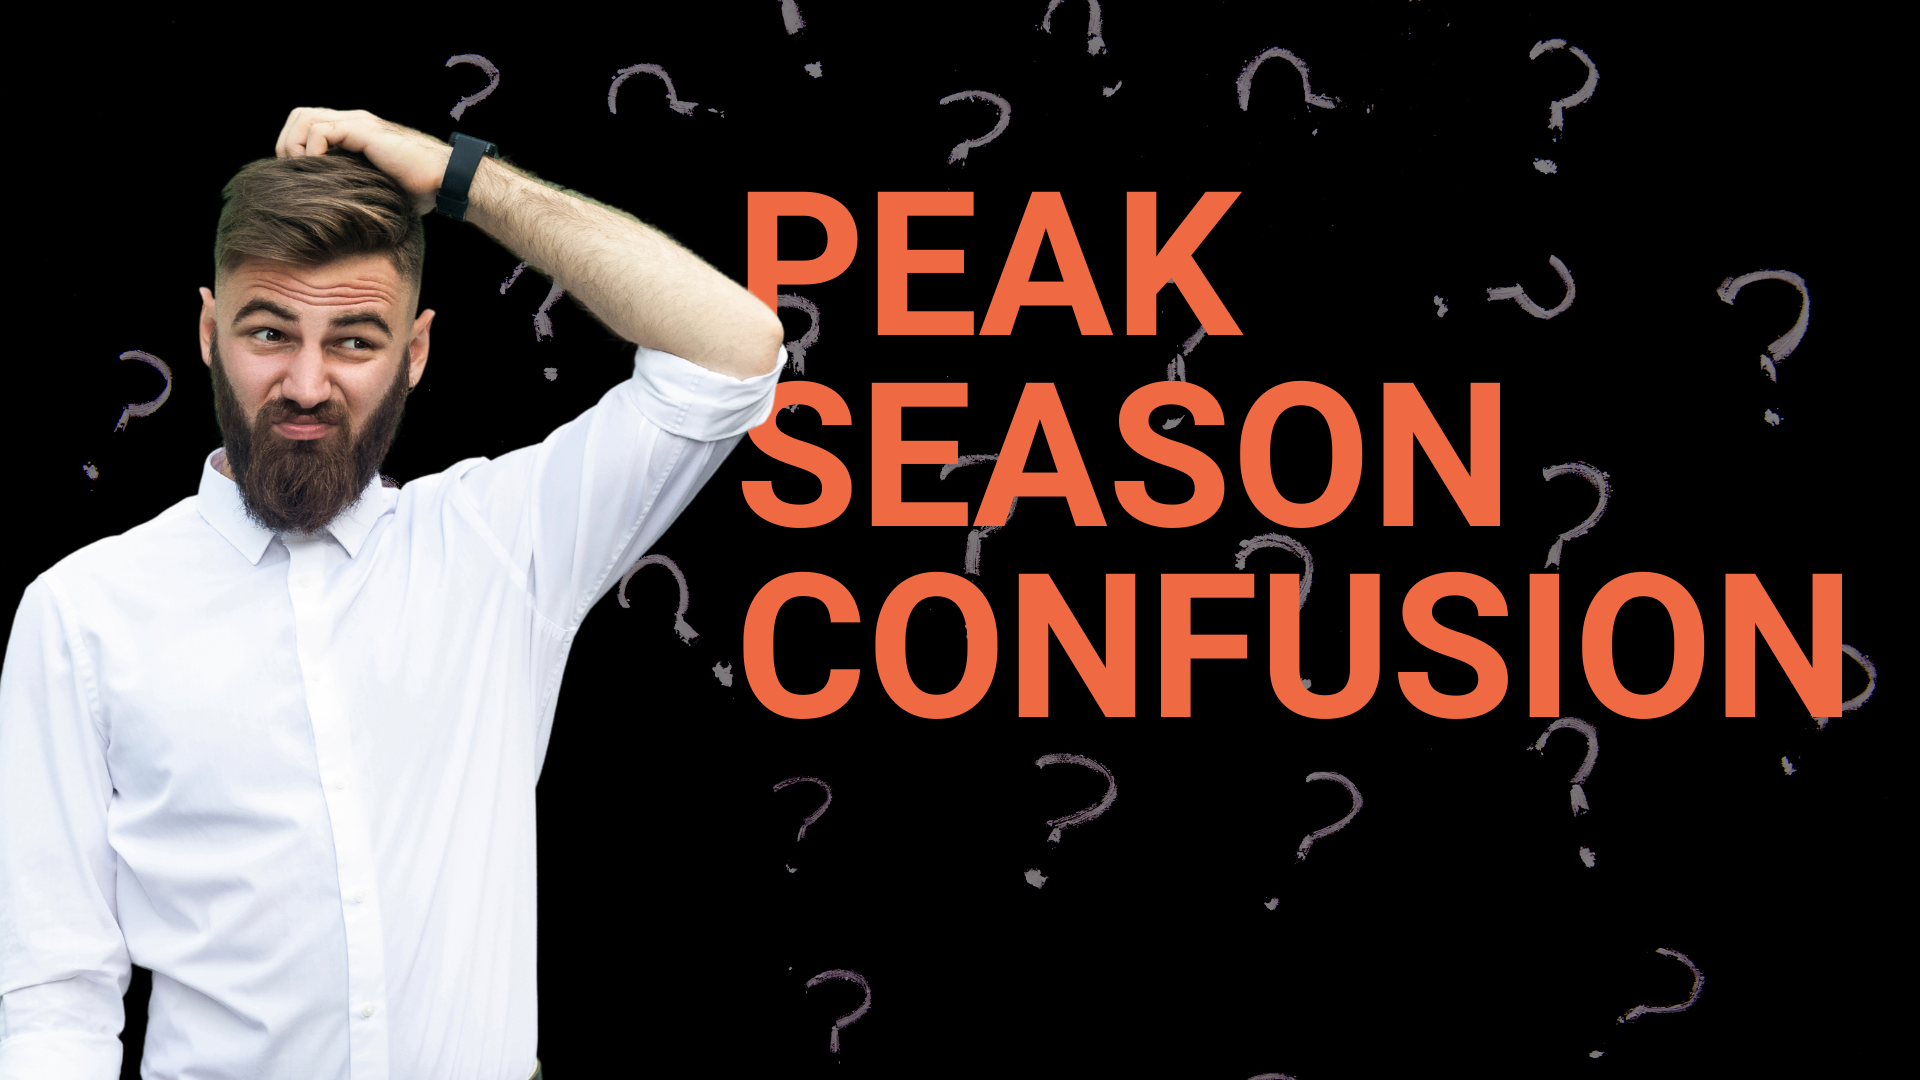 Man scratching head at "peak season confusion" against a backdrop of questions marks on a black background